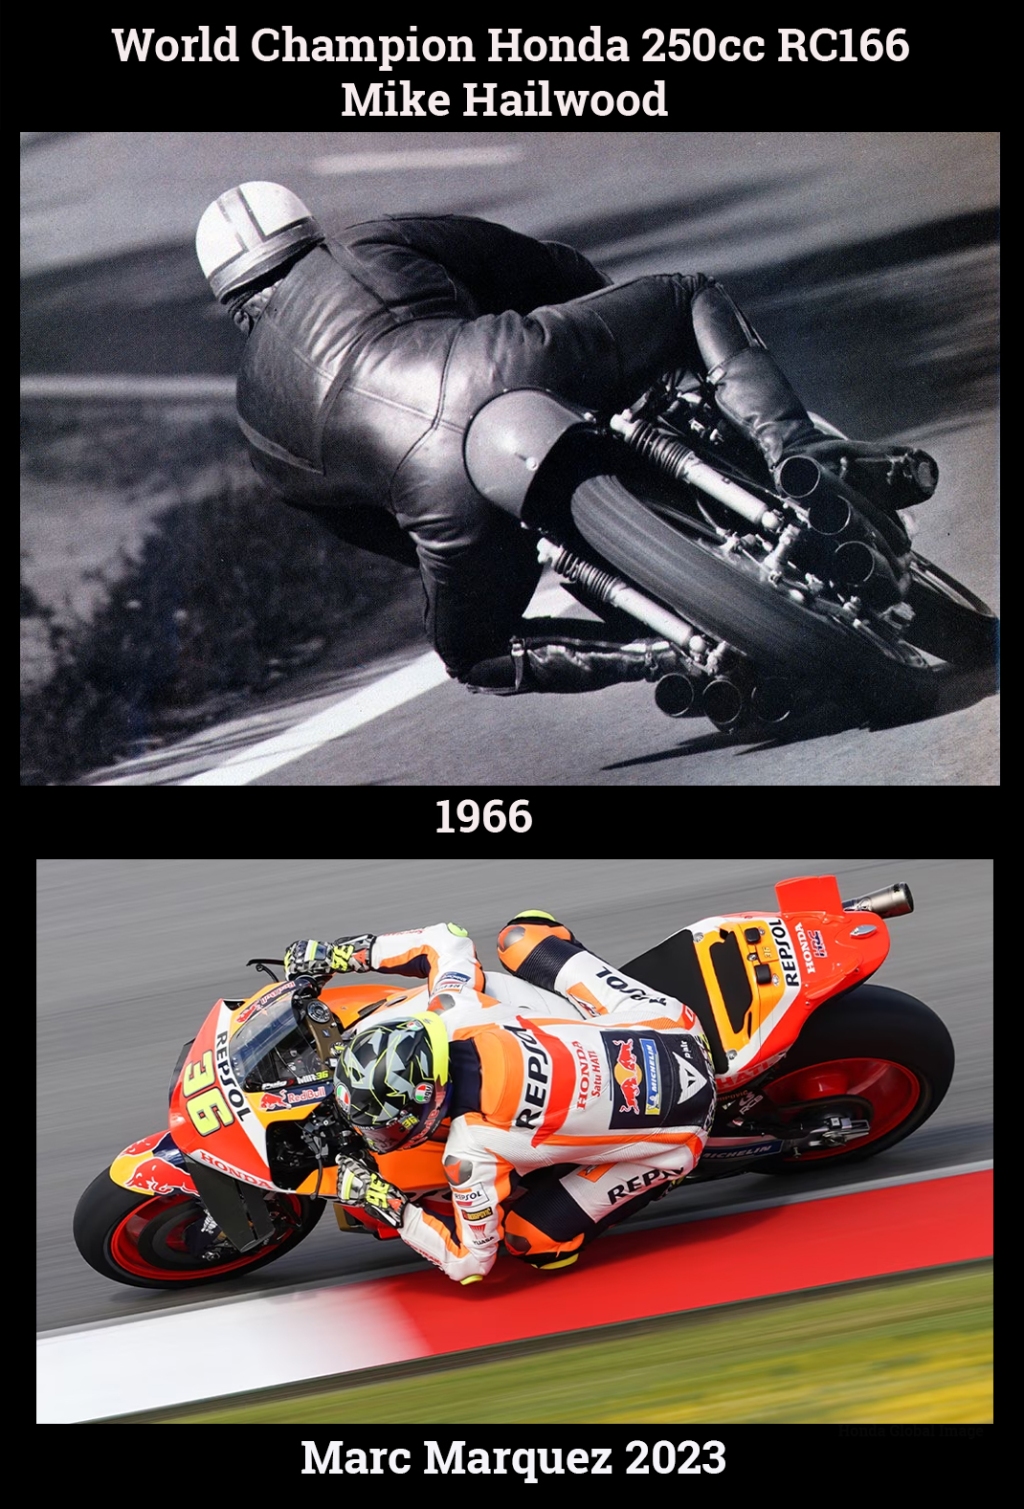 Rivals Mike Hailwood and Giacomo Agostini or Marc Marquez and Andrea Dovizioso. Rivals that can make you smile!